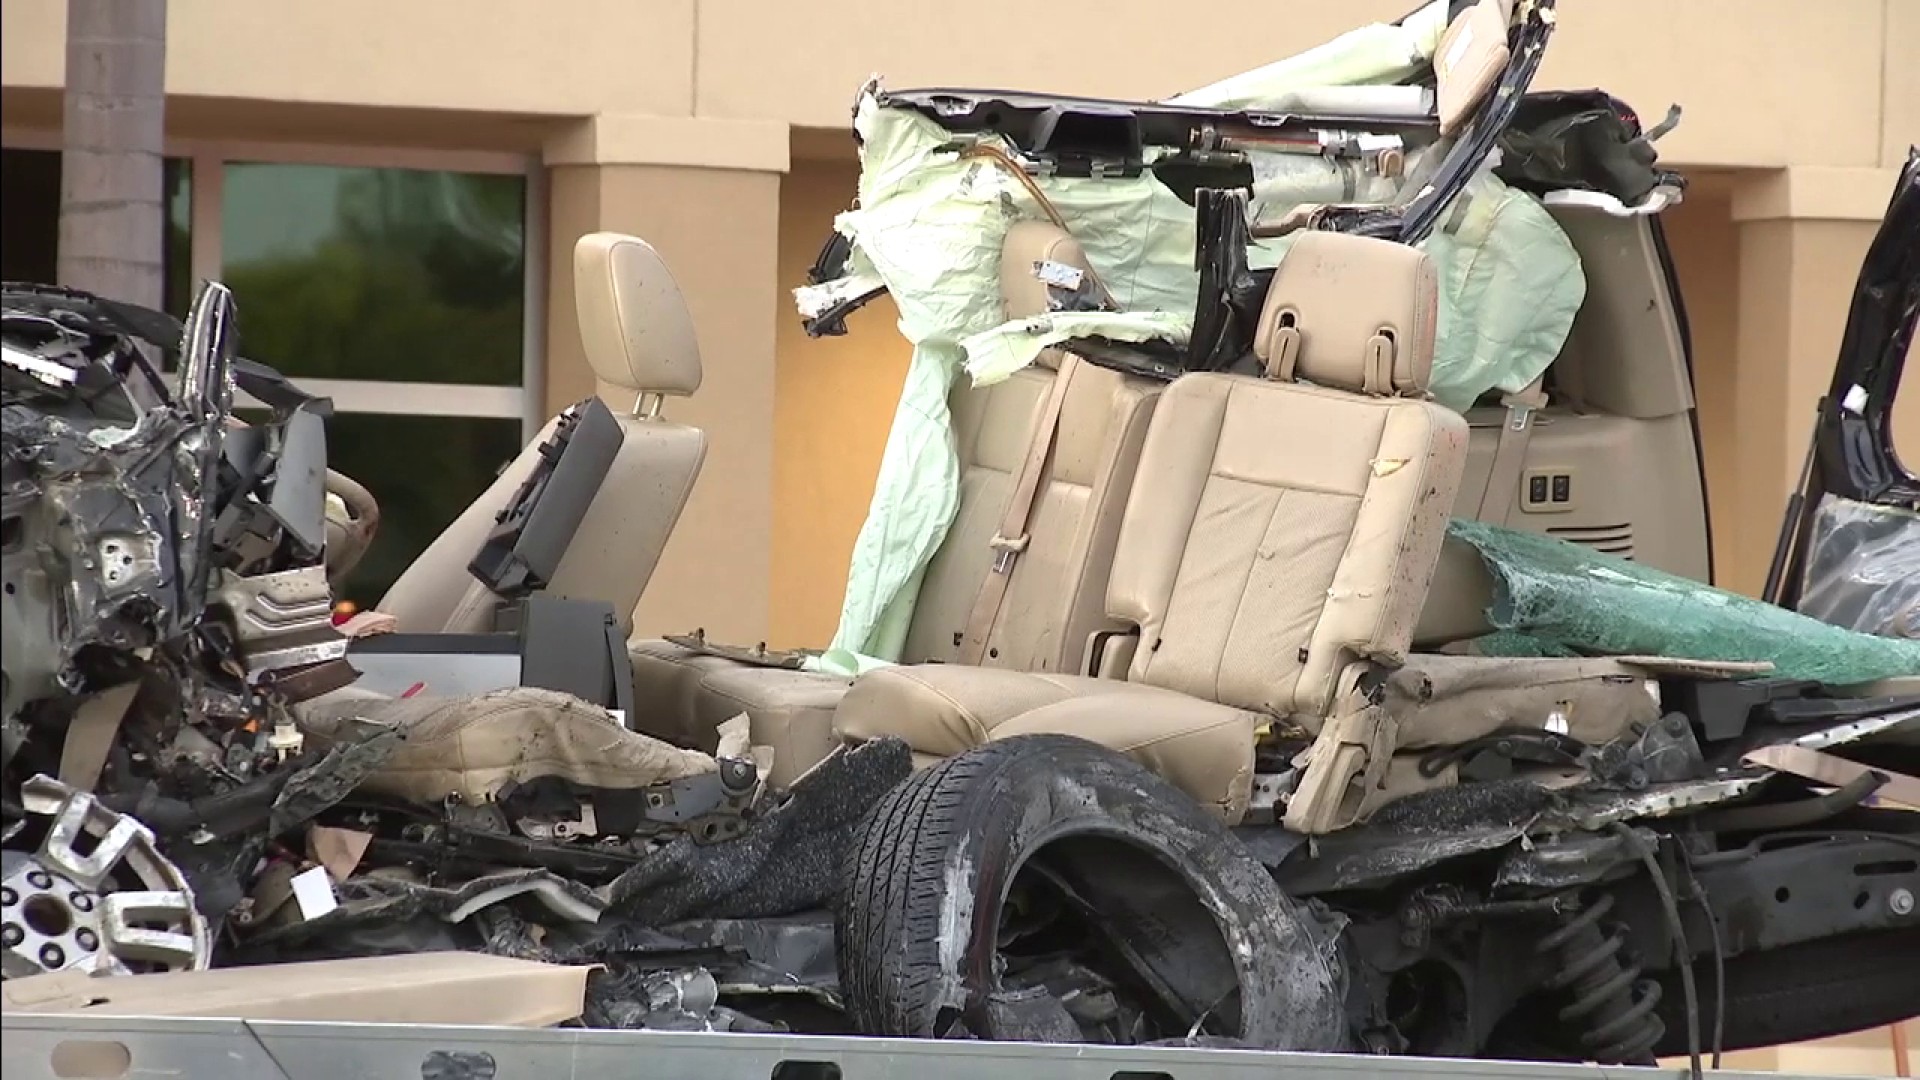 Sunday morning crash in Wilton Manors leaves SUV unrecognizable